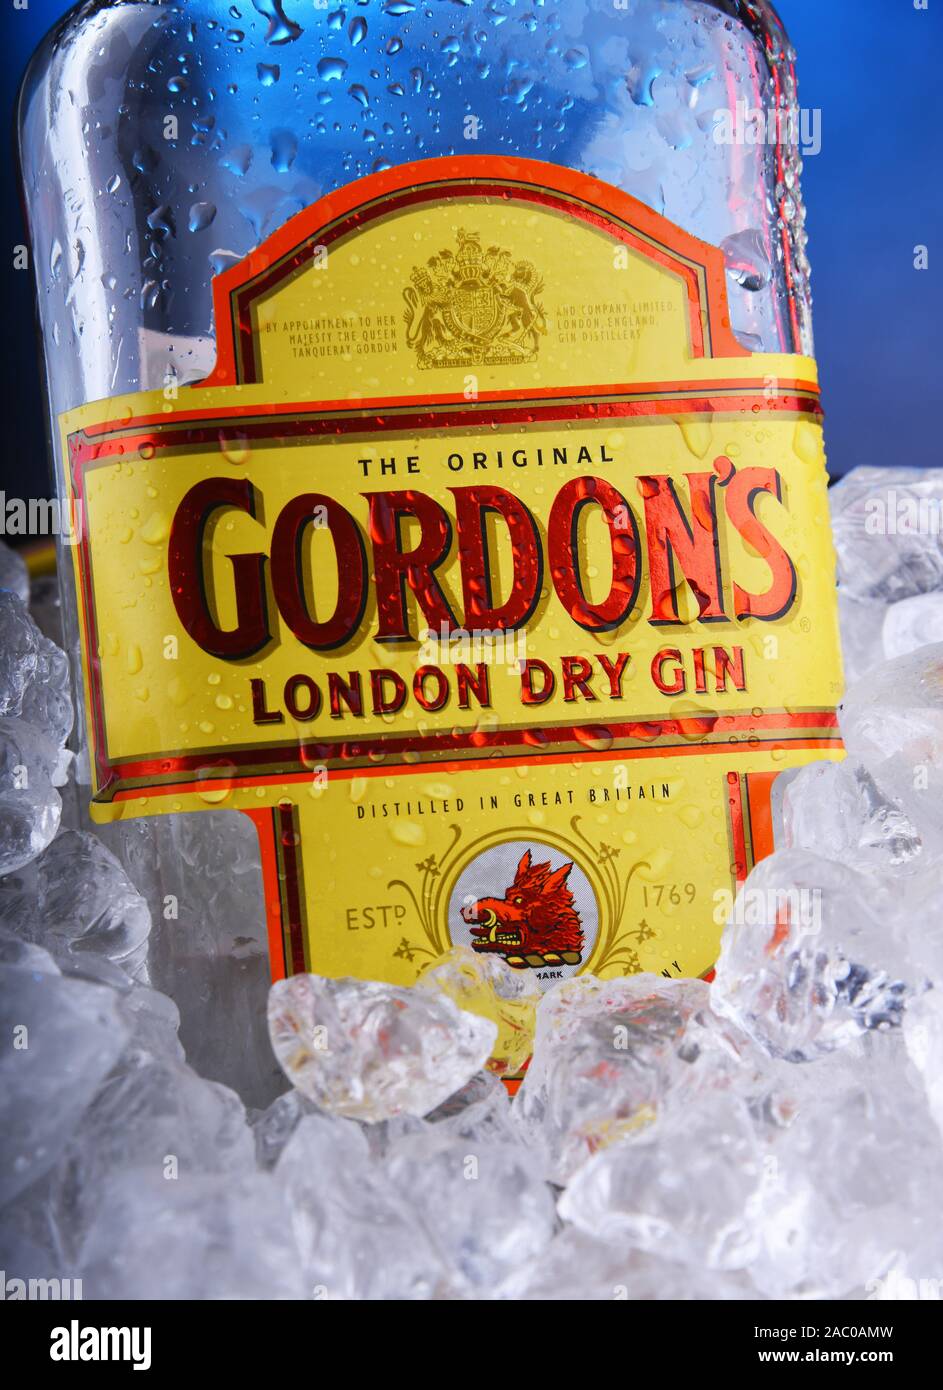 POZNAN, POL - NOV 21, 2019: Bottle of Gordon's London Dry, a brand of the world's best selling London Dry gin. It is owned by the British spirits comp Stock Photo